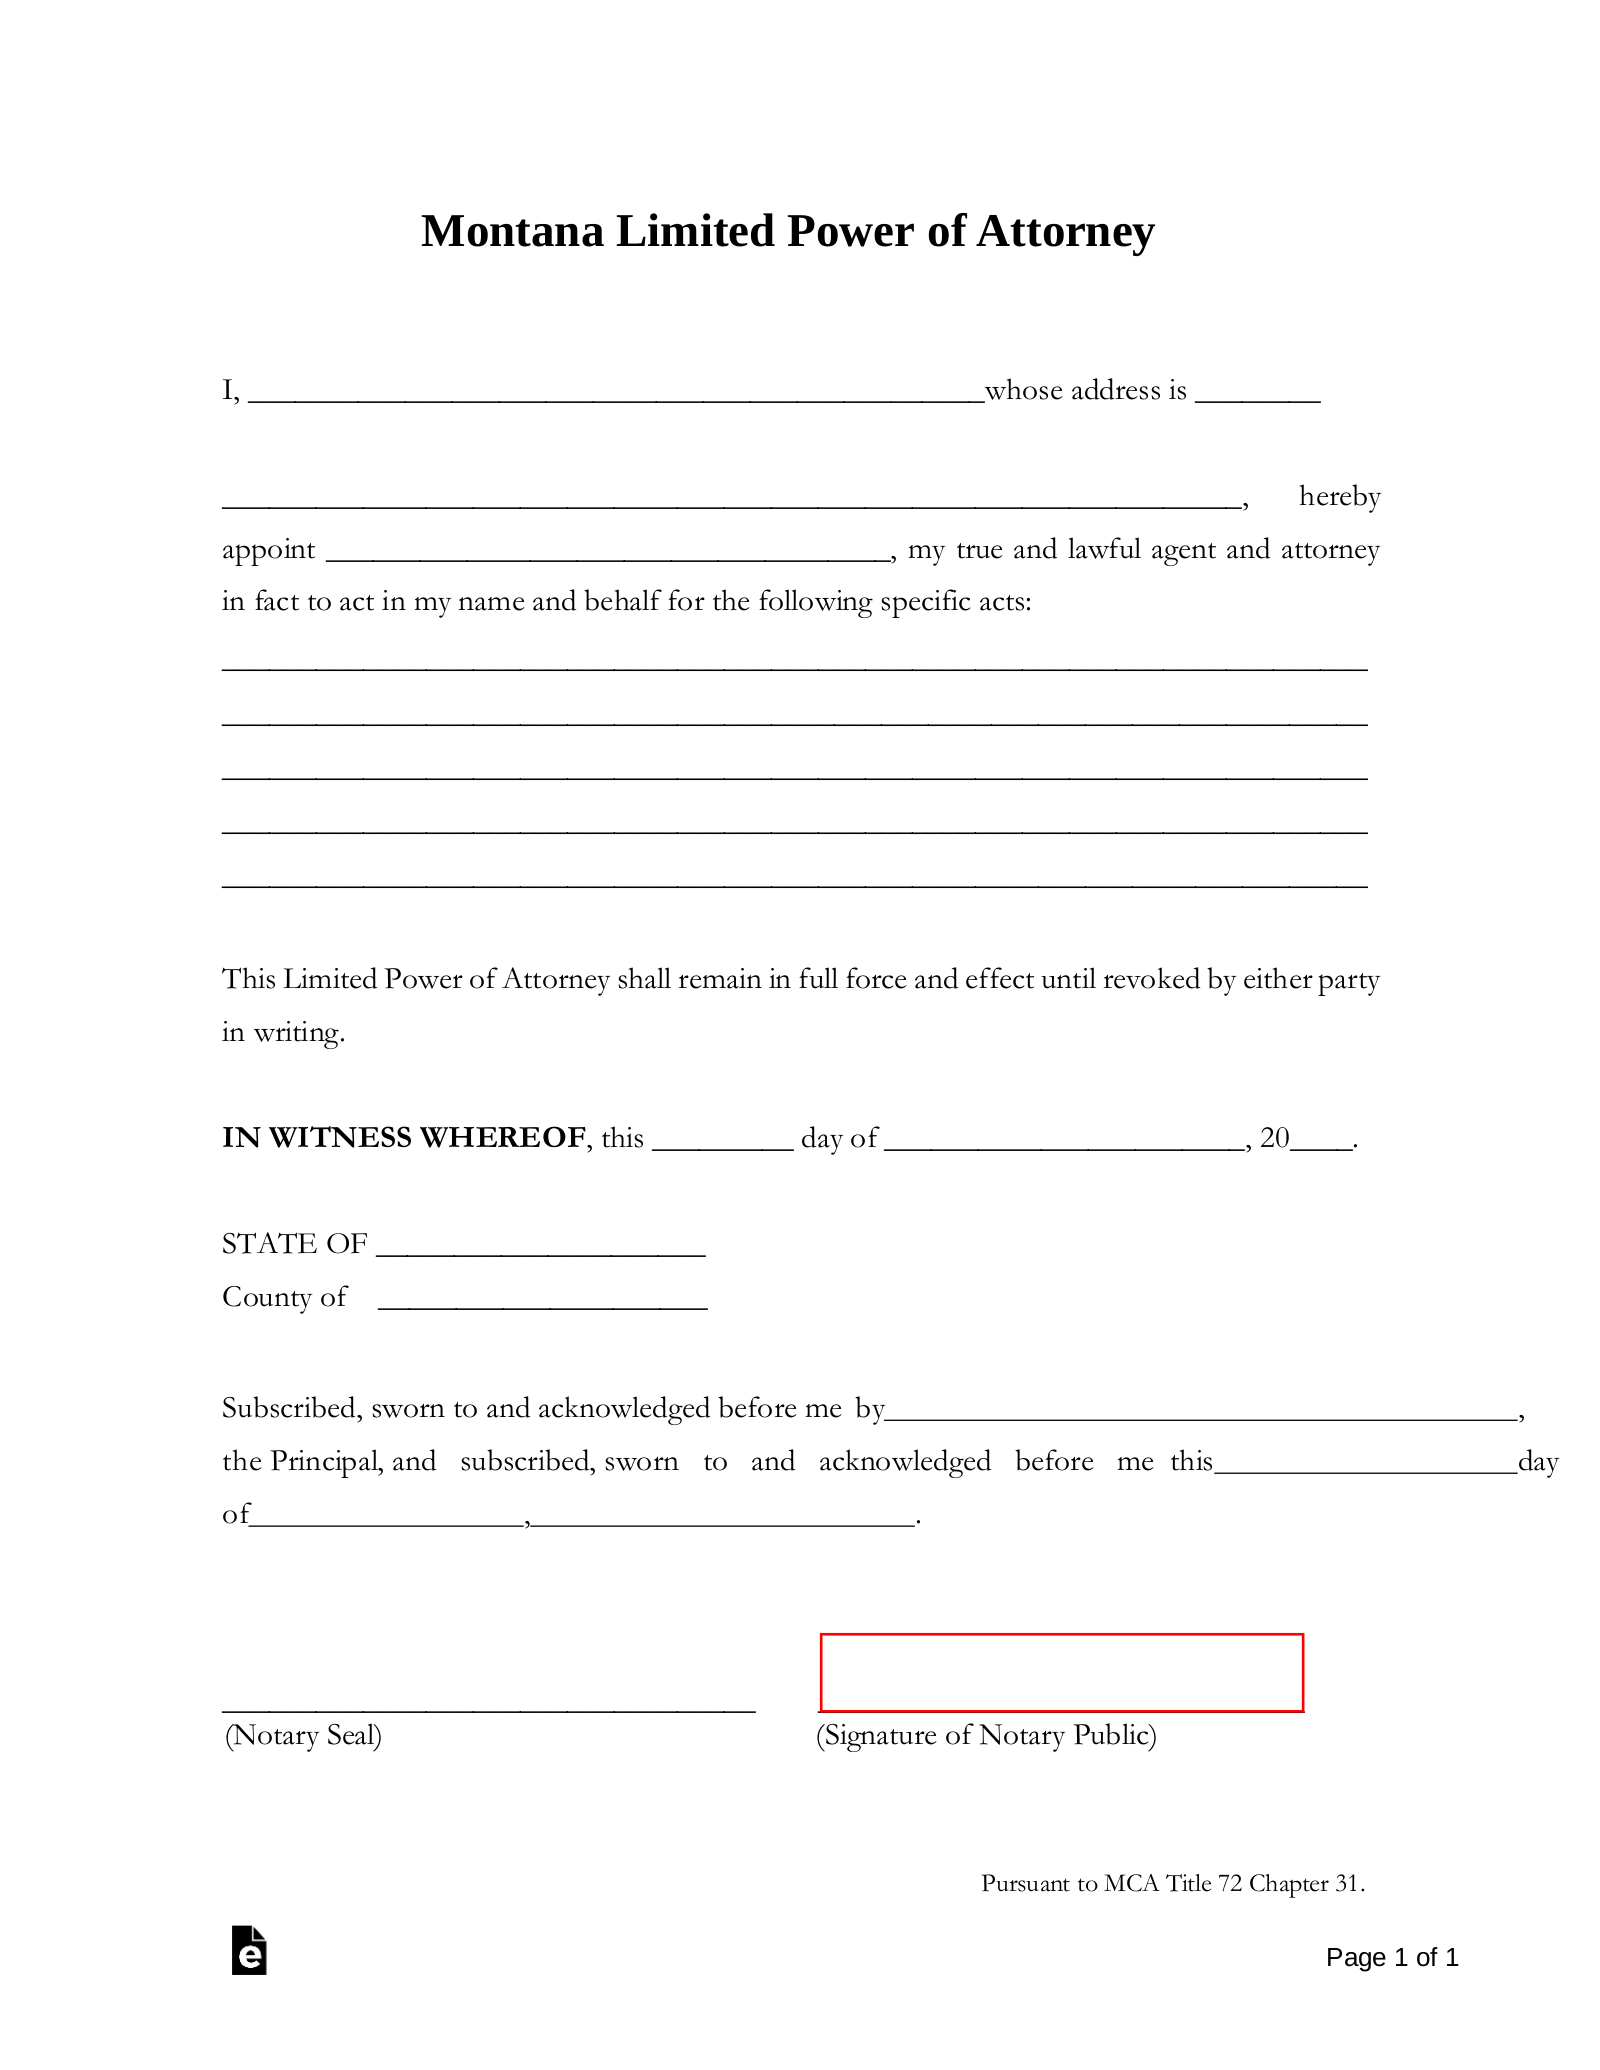 Montana Limited Power of Attorney Form